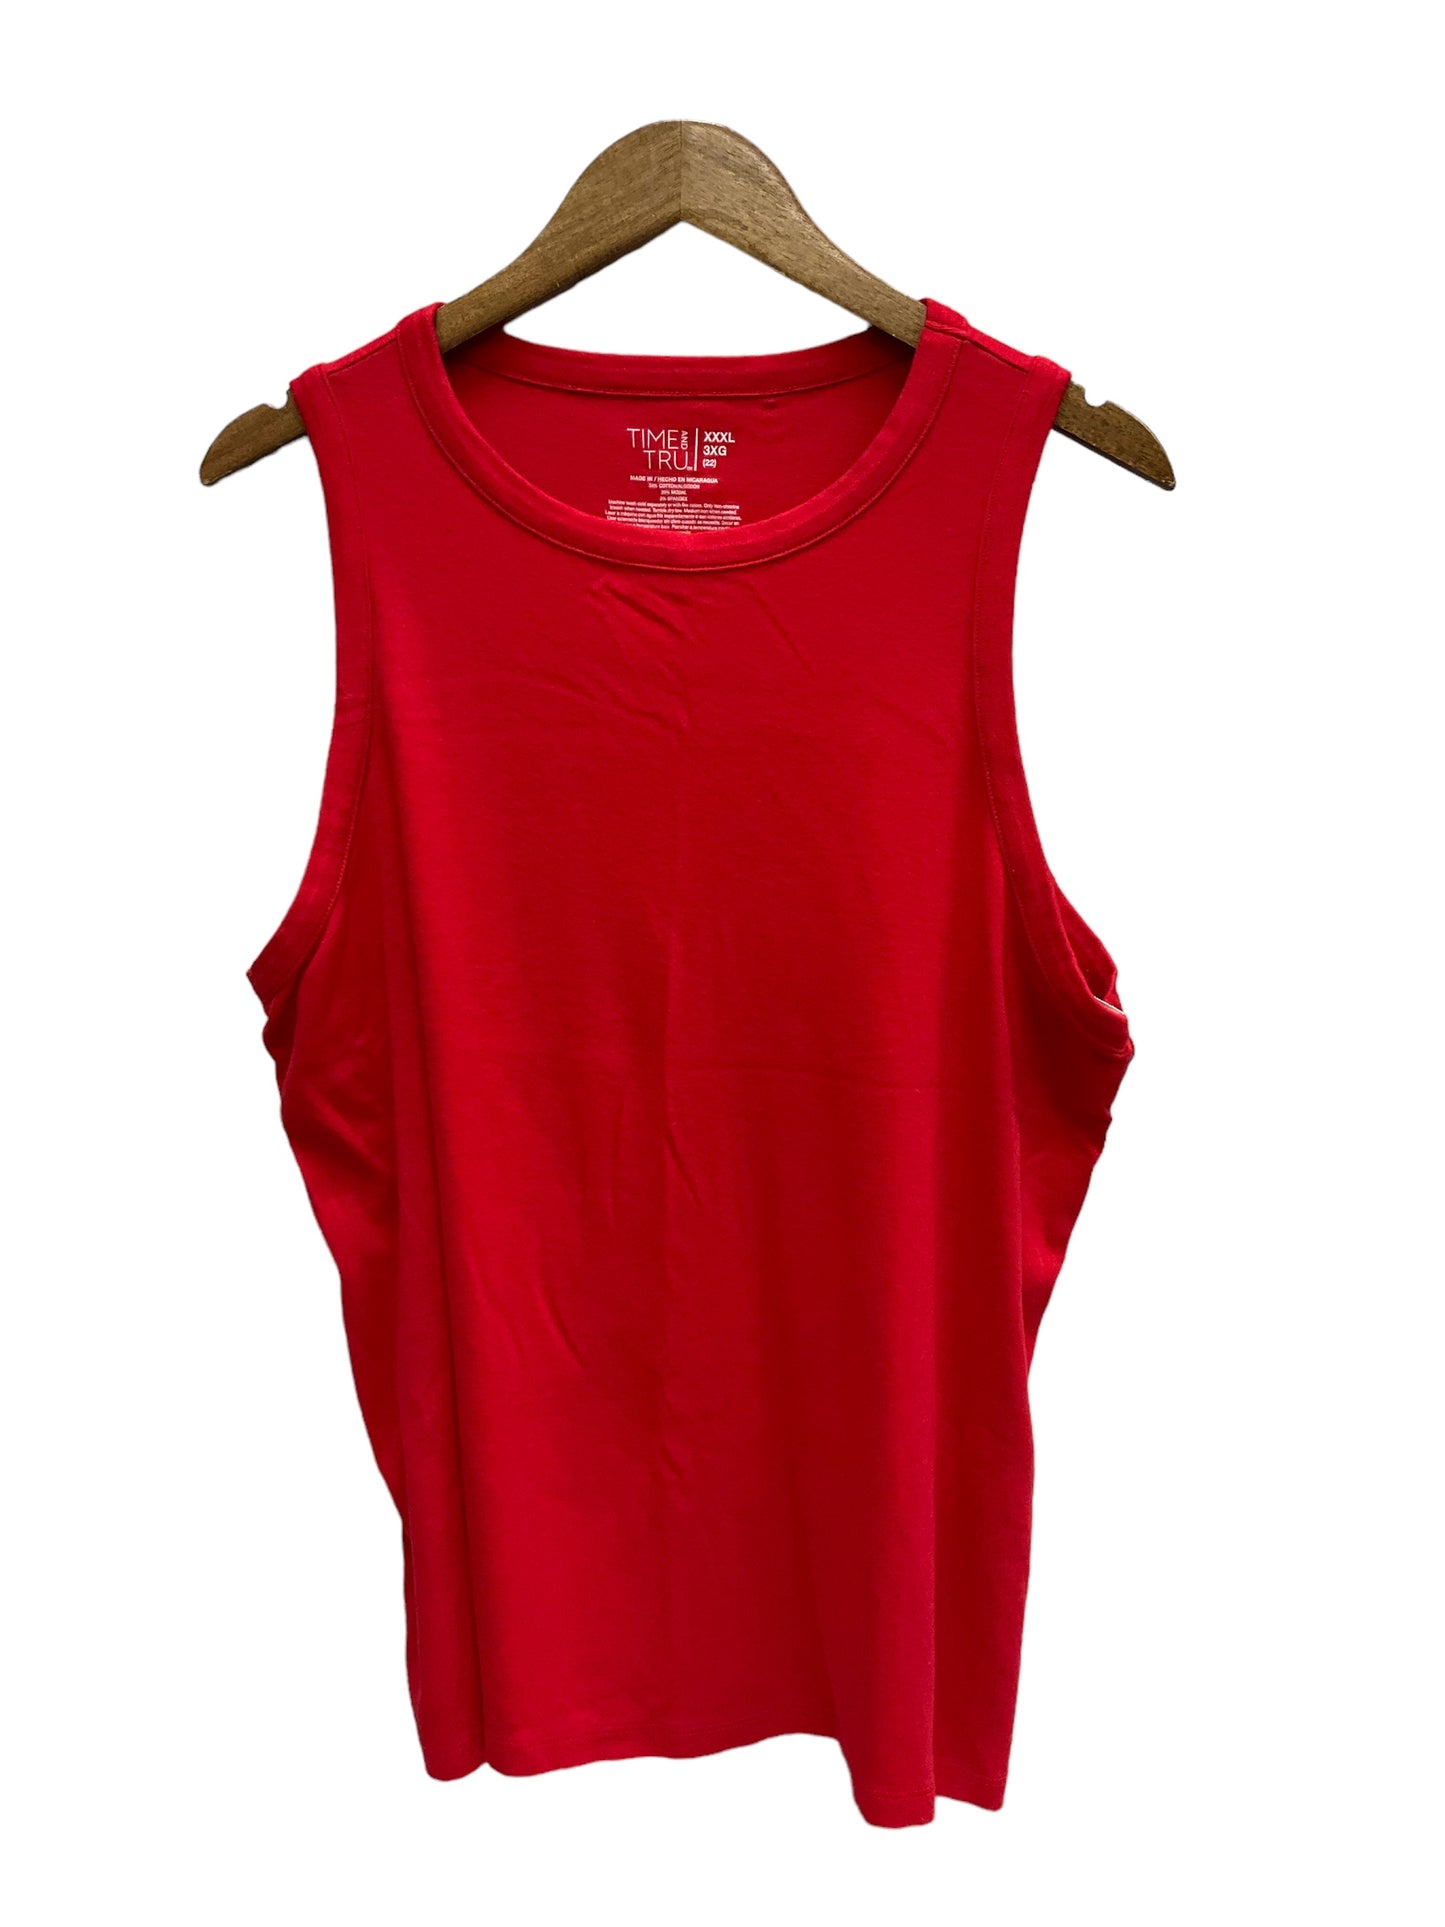 Top Sleeveless Basic By Time And Tru  Size: 3x